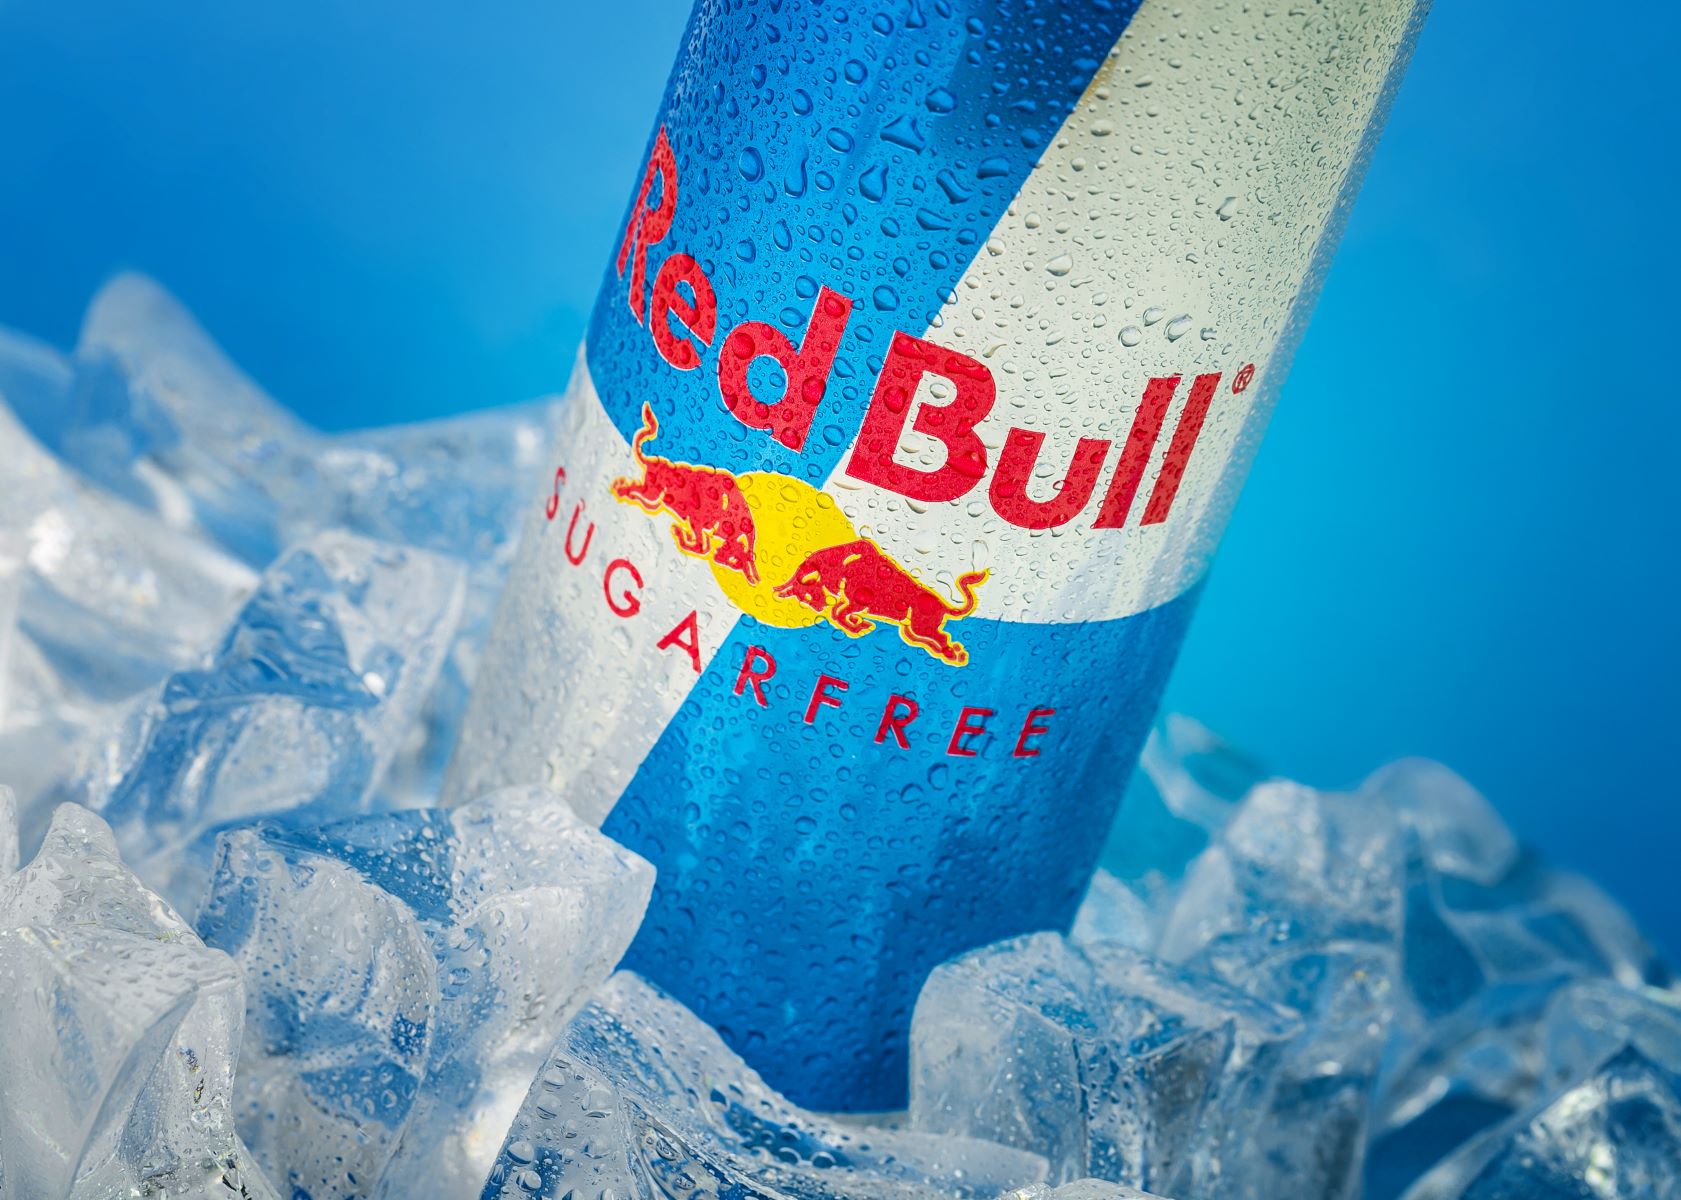 10-red-bull-sugarfree-nutrition-facts